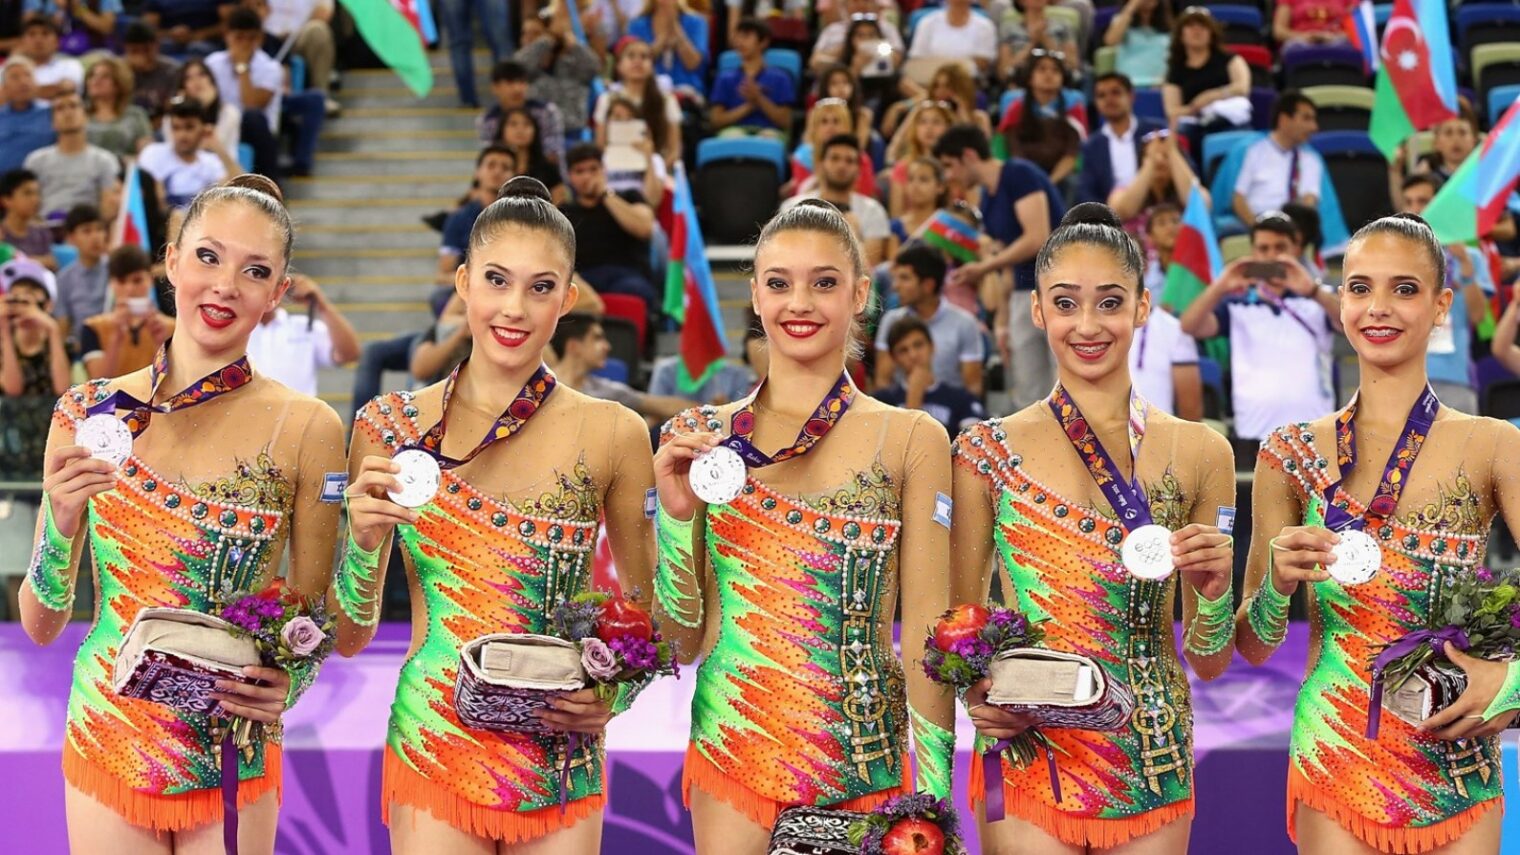 Israel’s rhythmic gymnastics teammates with their silver medals at the European Games in 2015. Photo by Robert Prezioso/Getty Images for BEGOC